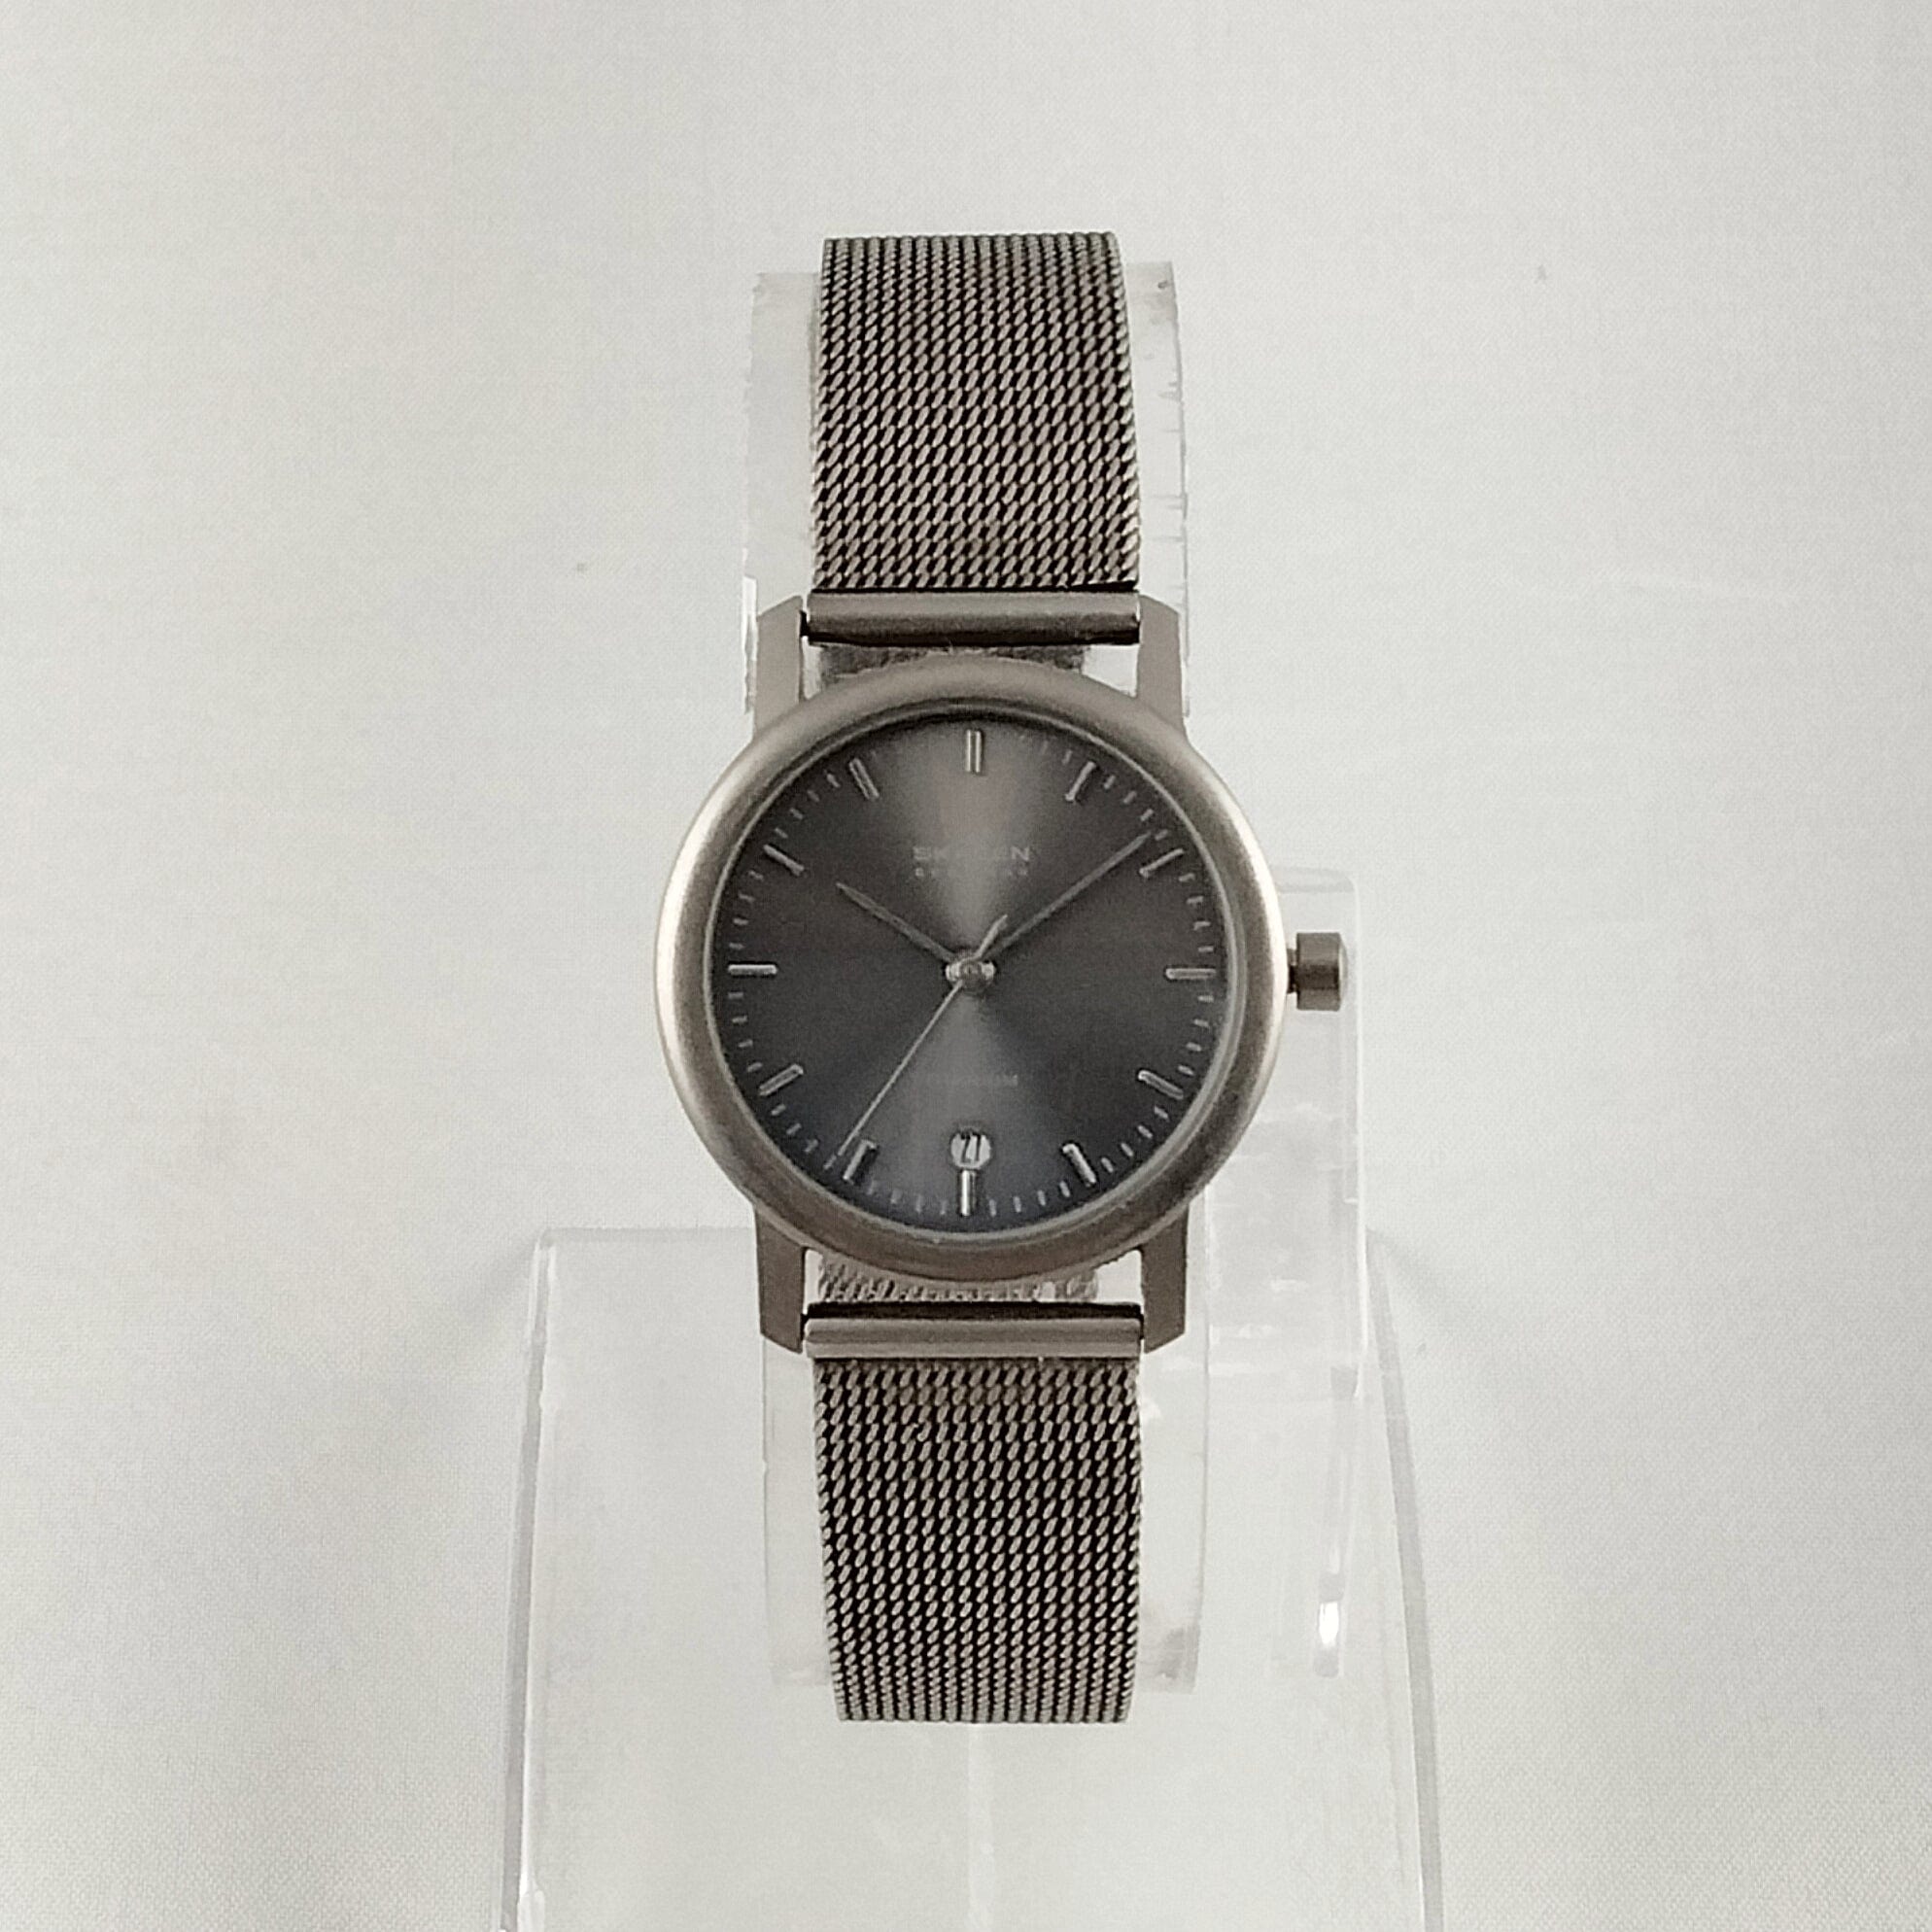 I Like Mikes Mid Century Modern Watches Skagen Women's Stainless Steel Watch, Navy Blue Dial, Mesh Strap